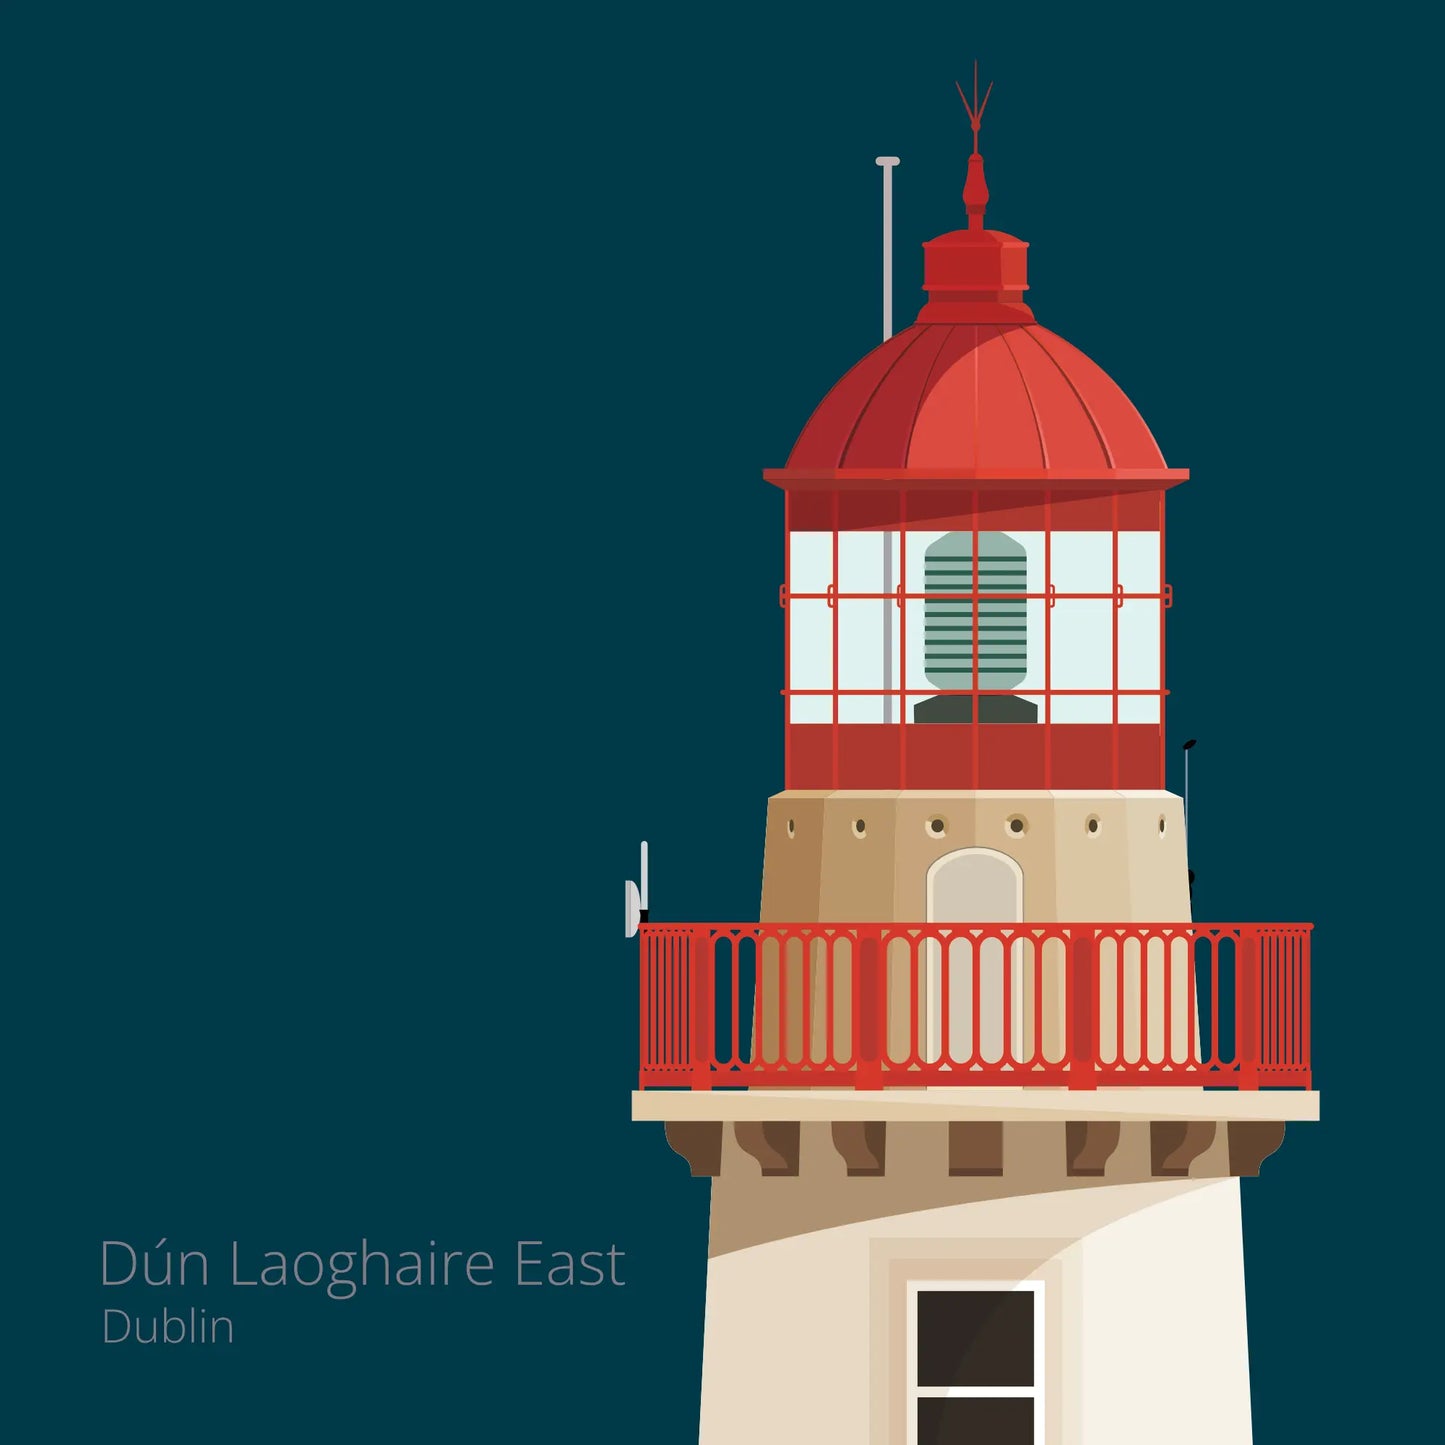 Illustration of Dún Laoghaire East lighthouse on a midnight blue background